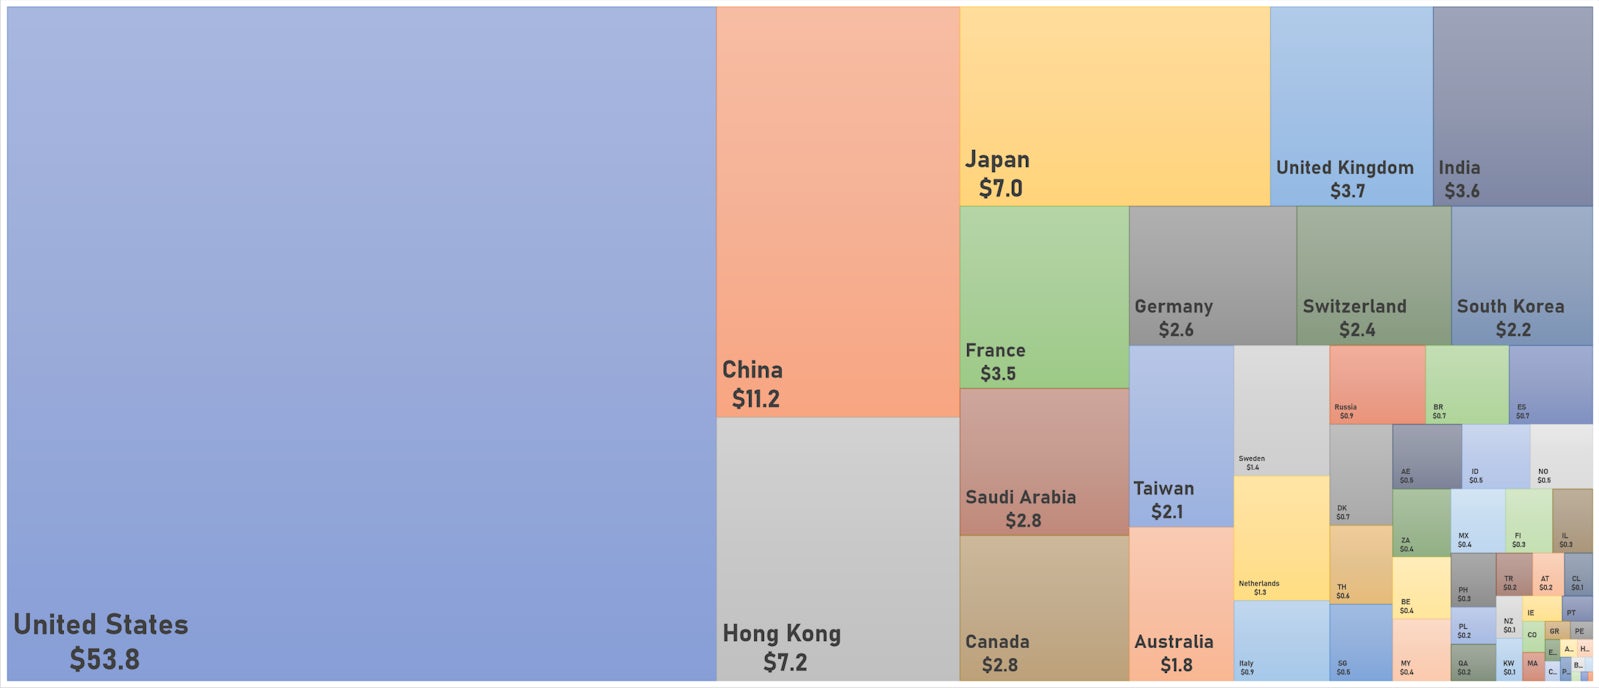 World Market Cap By Country (In US$ Trillion) | Sources: ϕpost, FactSet data